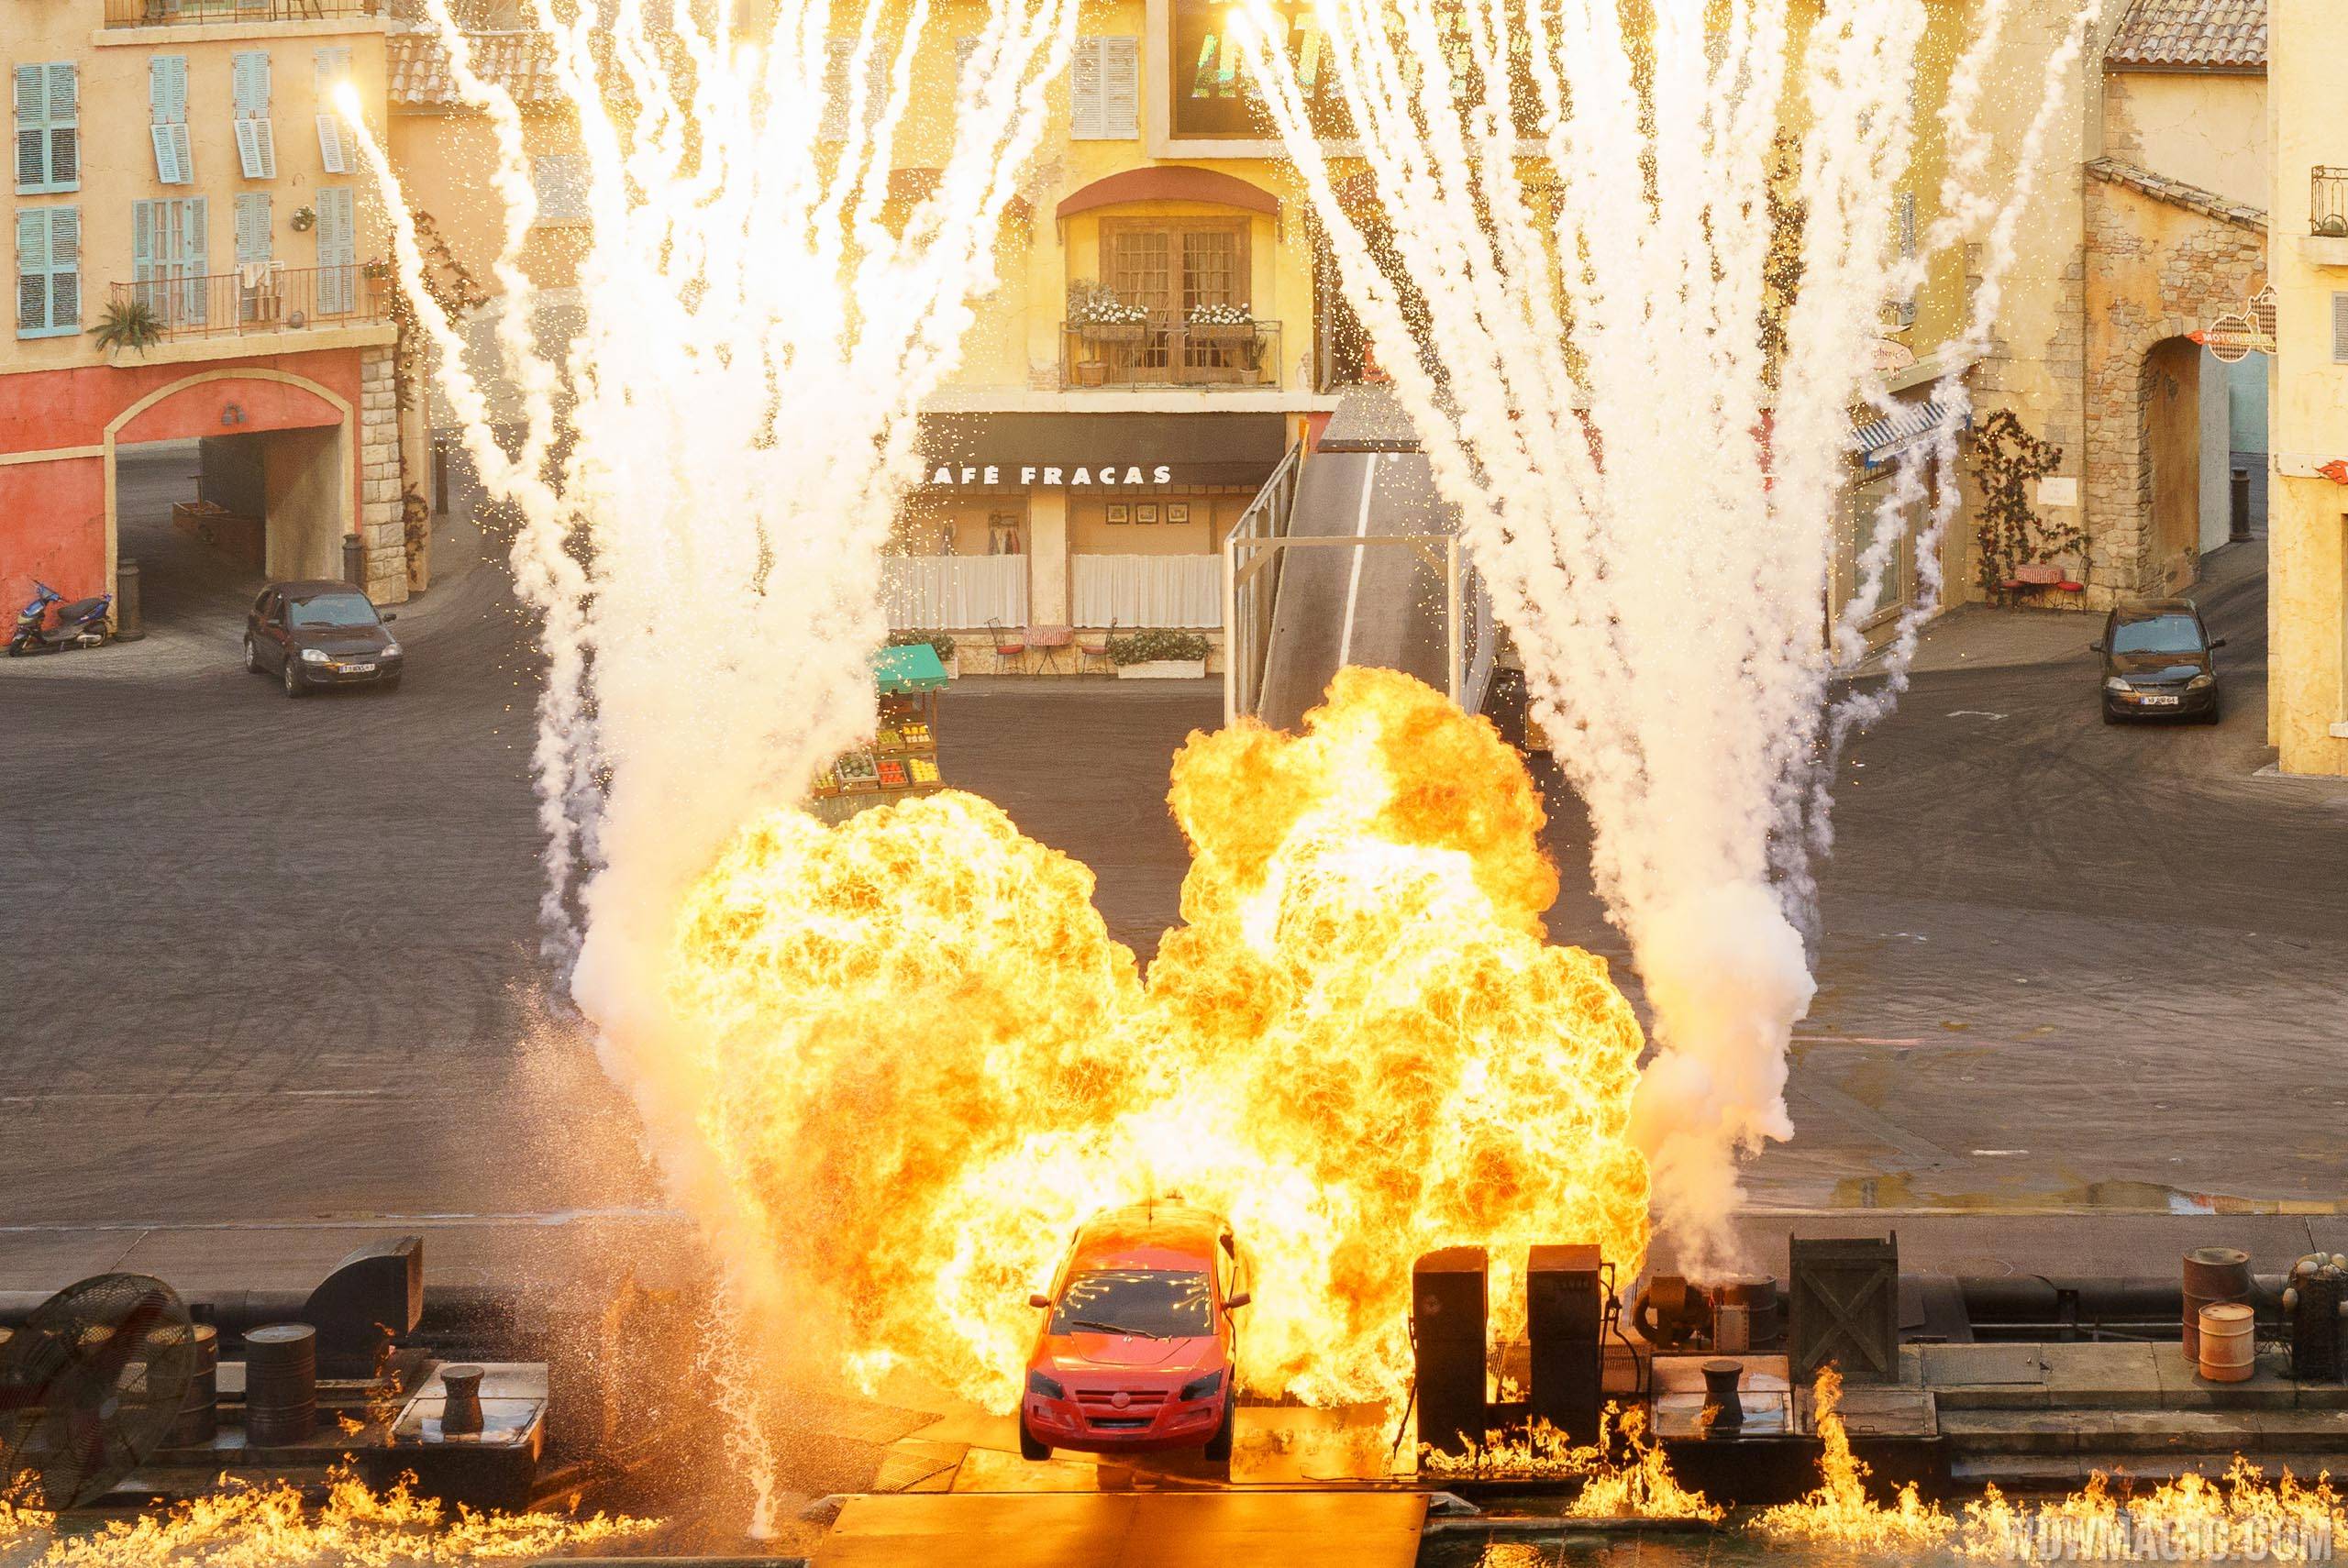 REPORT - The final performance of Lights, Motors, Action! Extreme Stunt Show